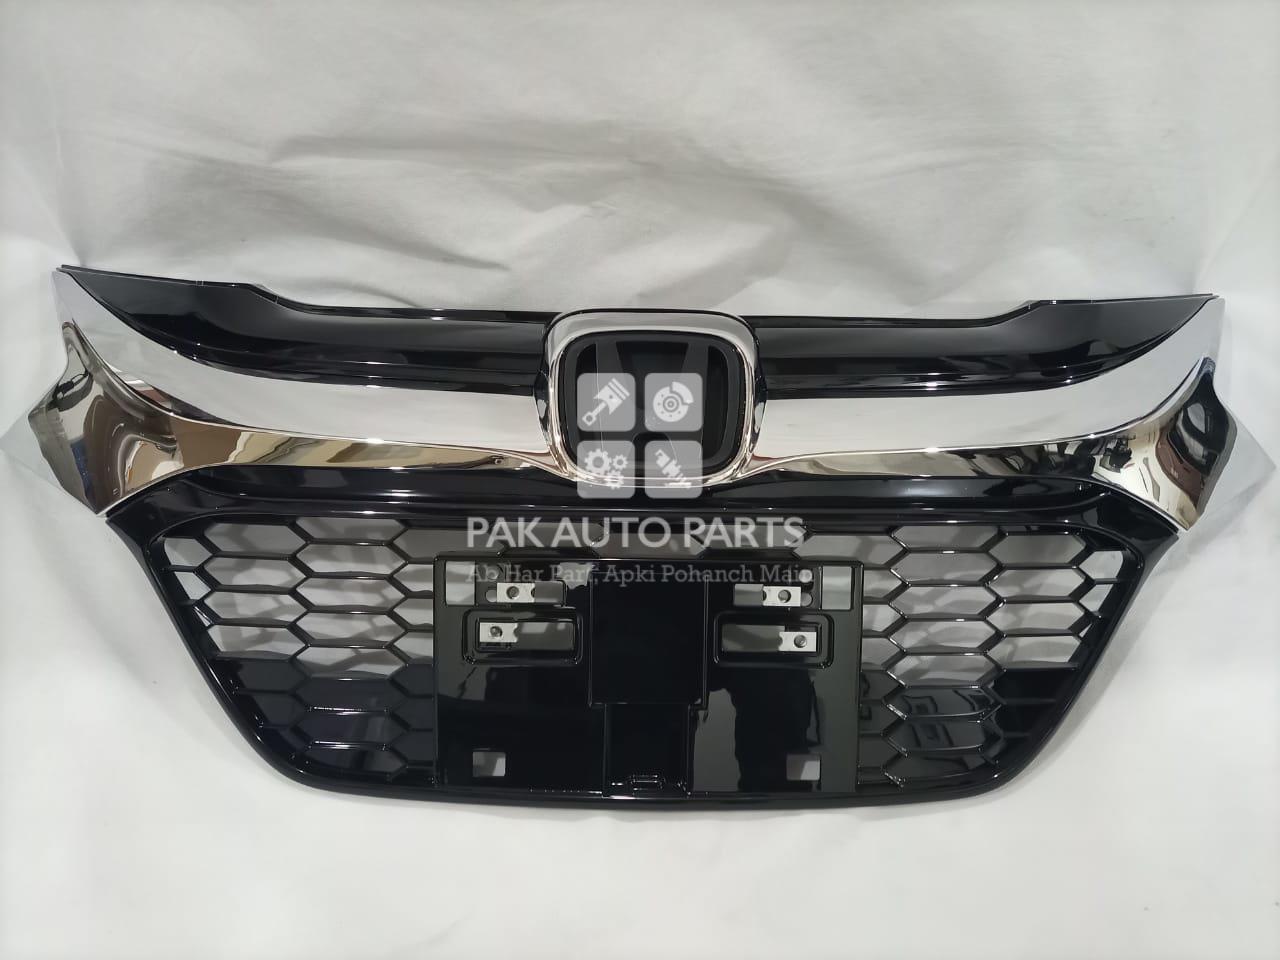 Picture of Honda Vezel 2020-21 Front Grill